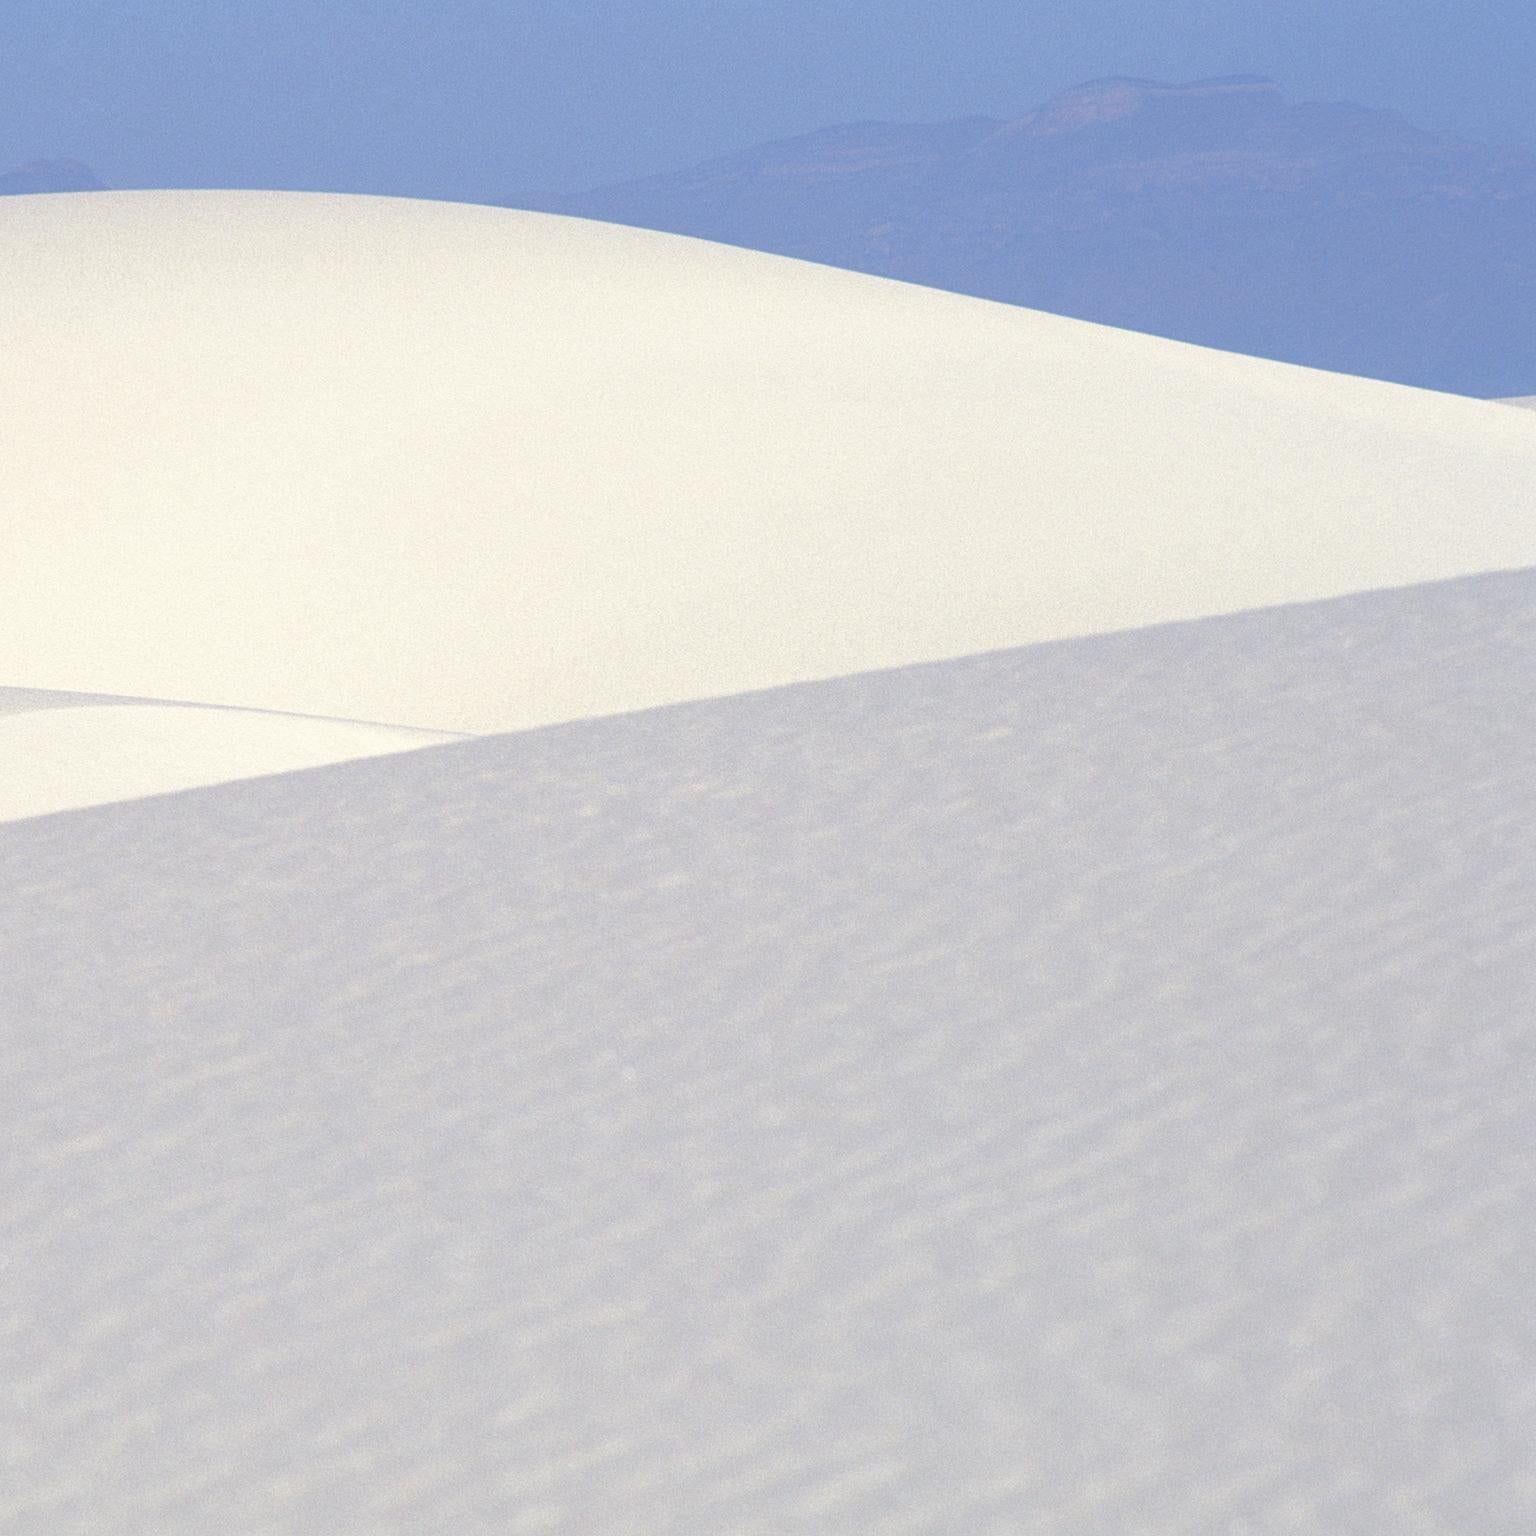 White Sands National Park, USA, 2004, Vers. 1 -  Like no place on earth, powder white sand dunes, 
Photograph by Cosmo Condina. Sand dunes as abstracts. 
Archival pigment print 19 X 12.3 in. Edition of 10. This is # 3/10 in the edition.

Rising from